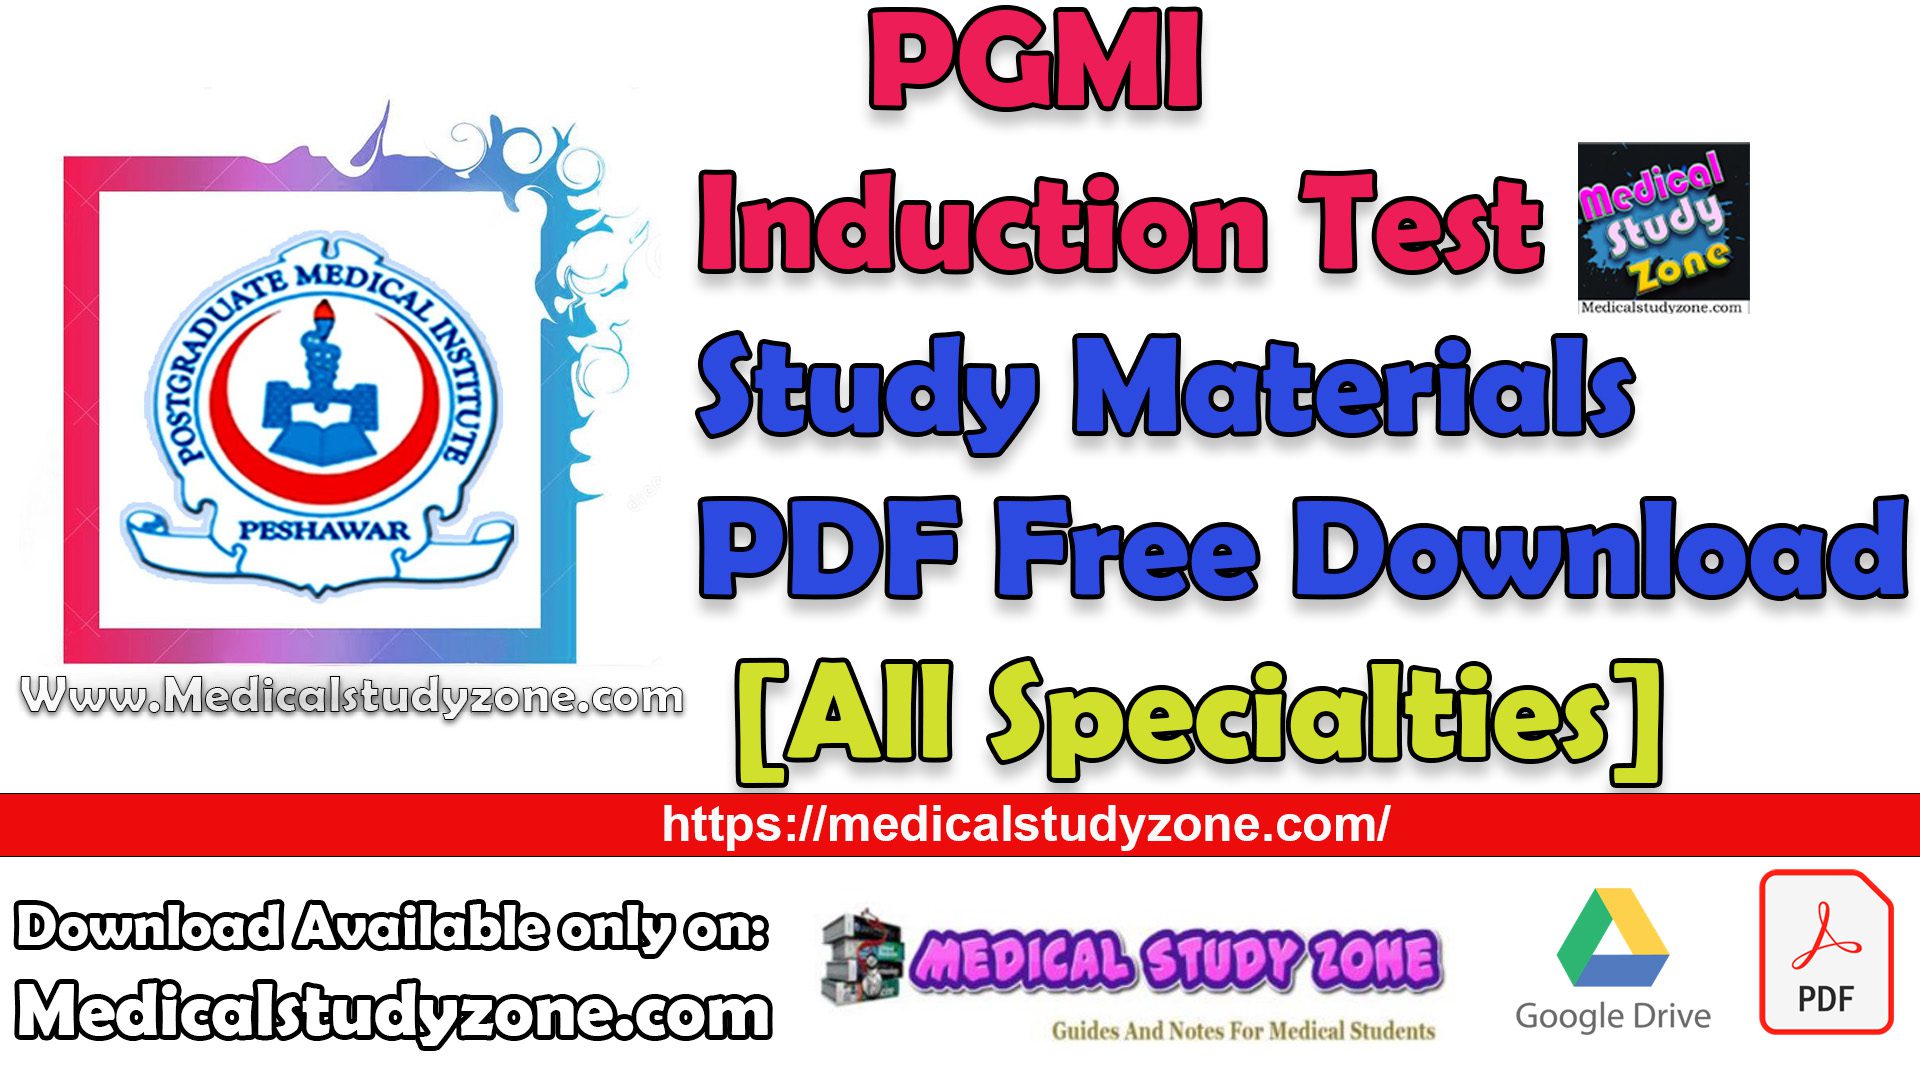 PGMI Induction Test Study Materials PDF Free Download [All Specialties]